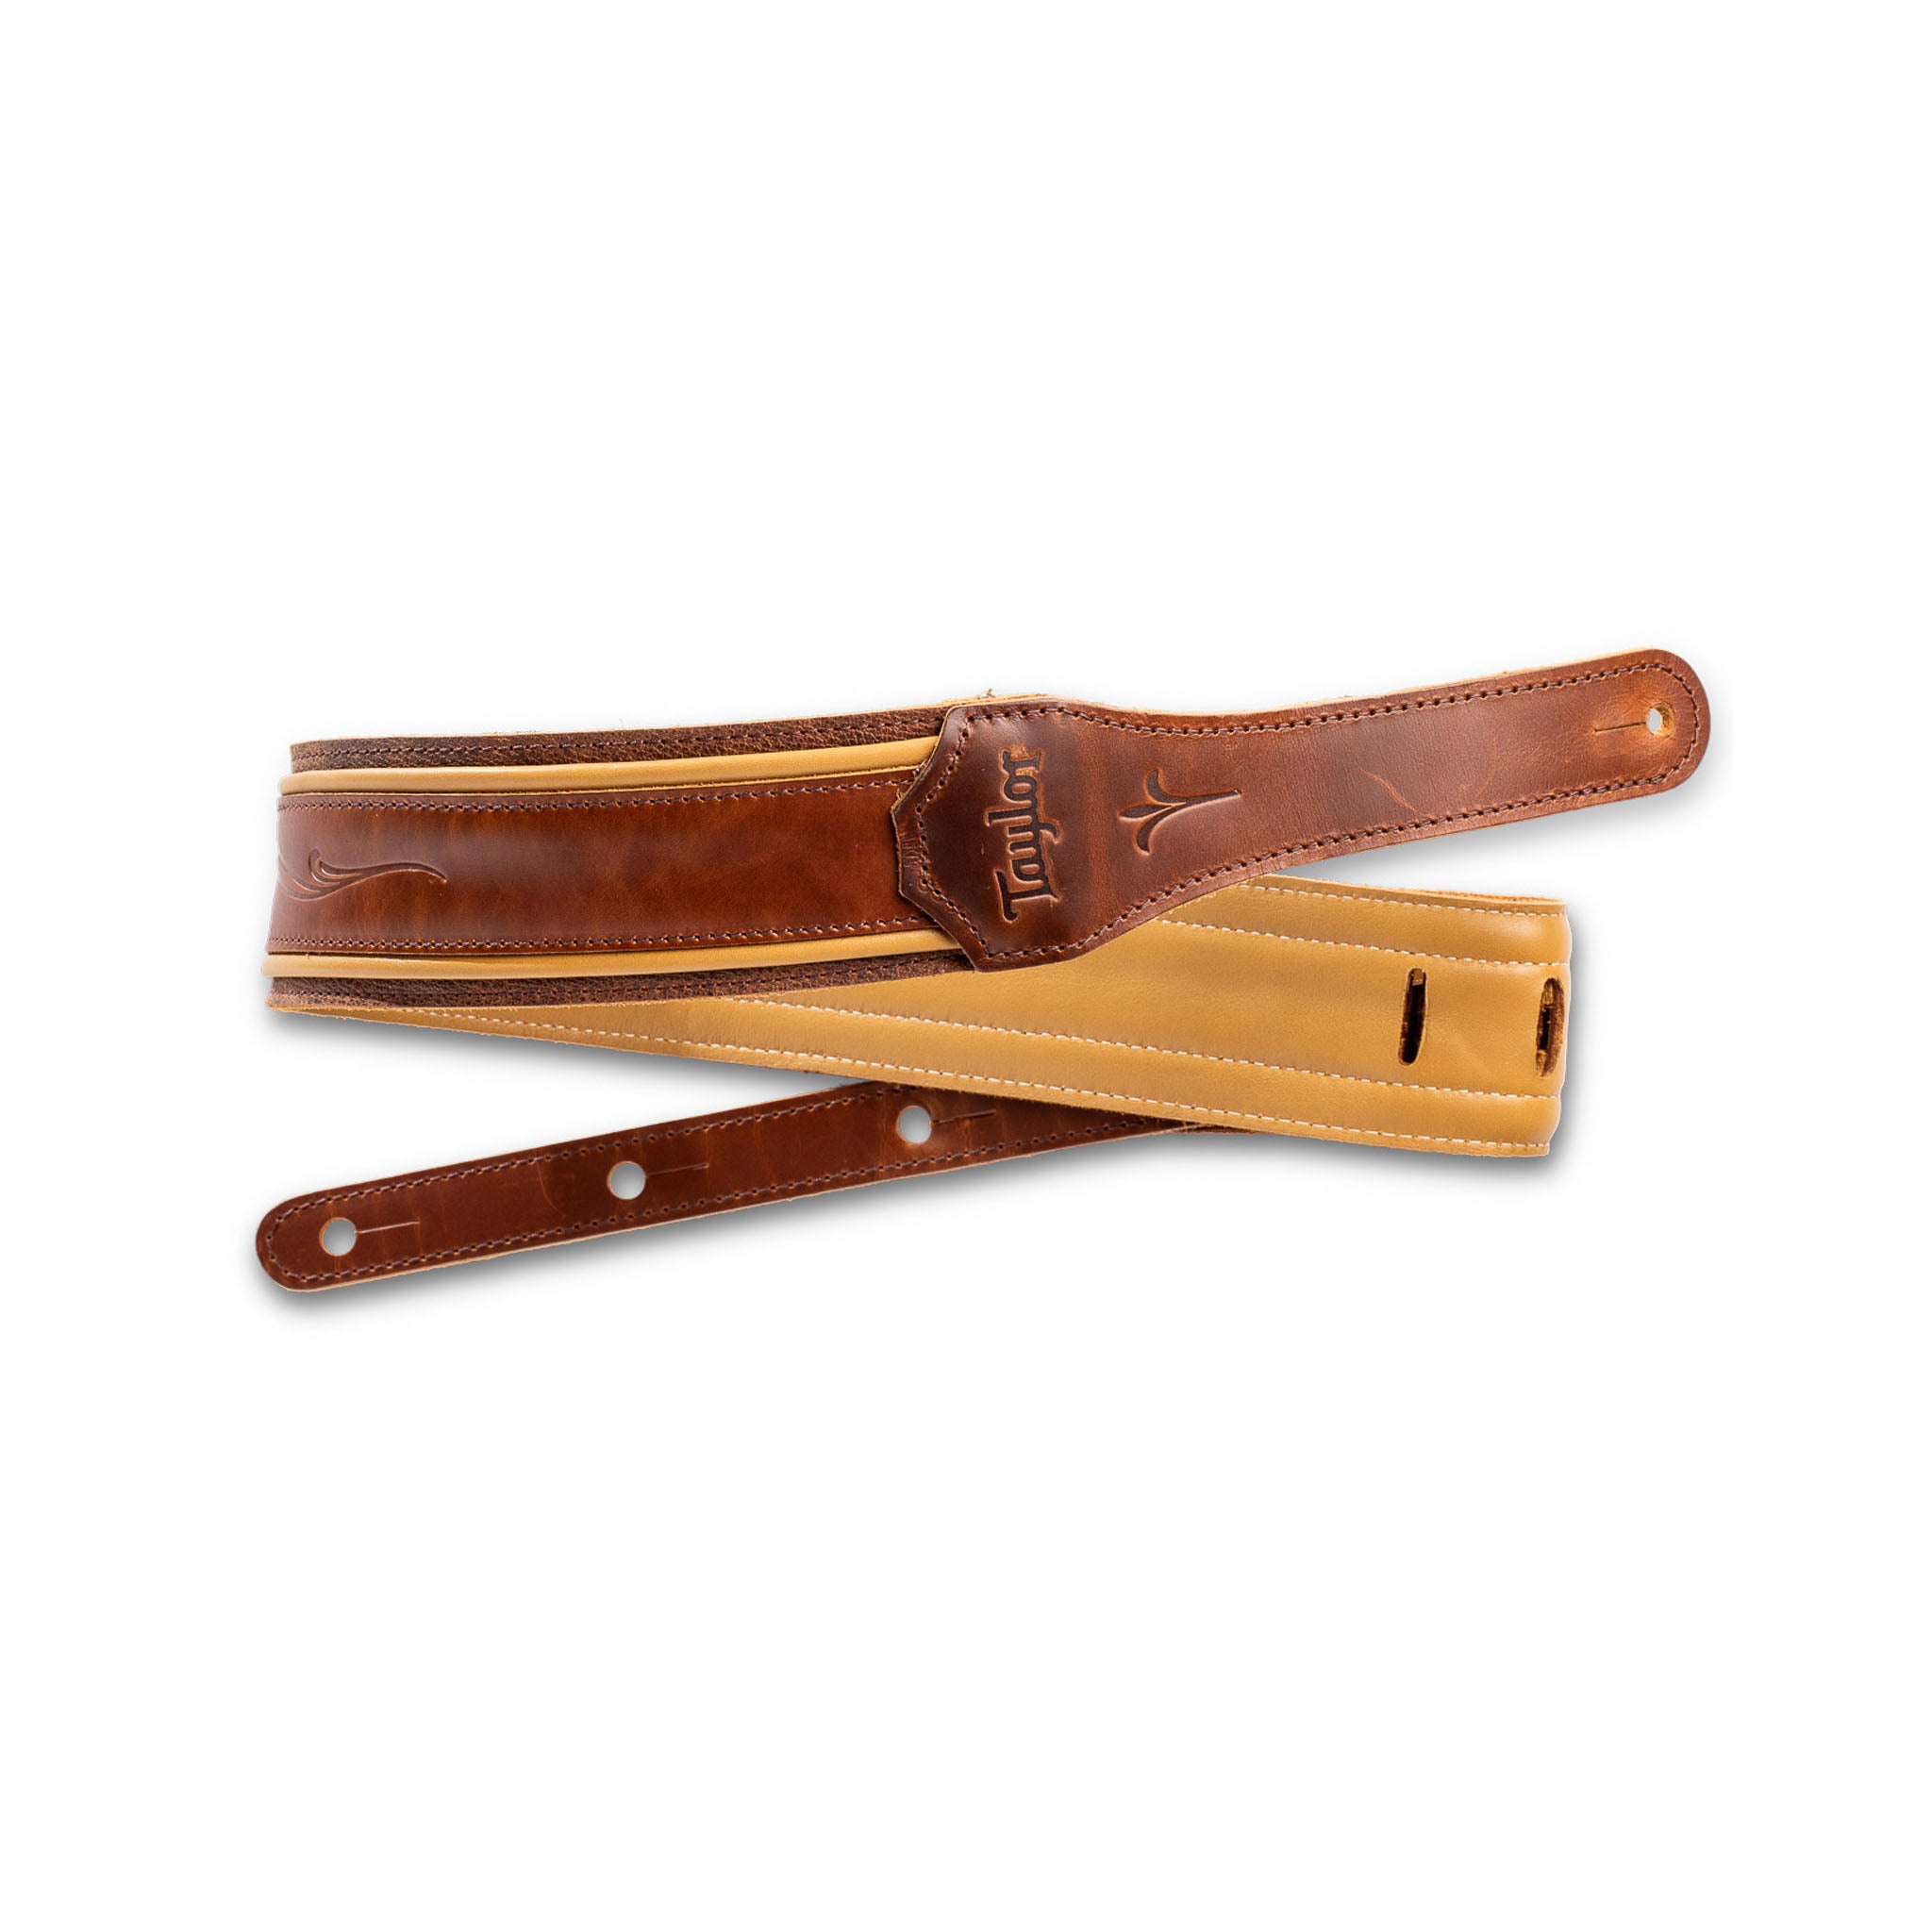 Taylor Century 2.5 Leather Guitar Strap